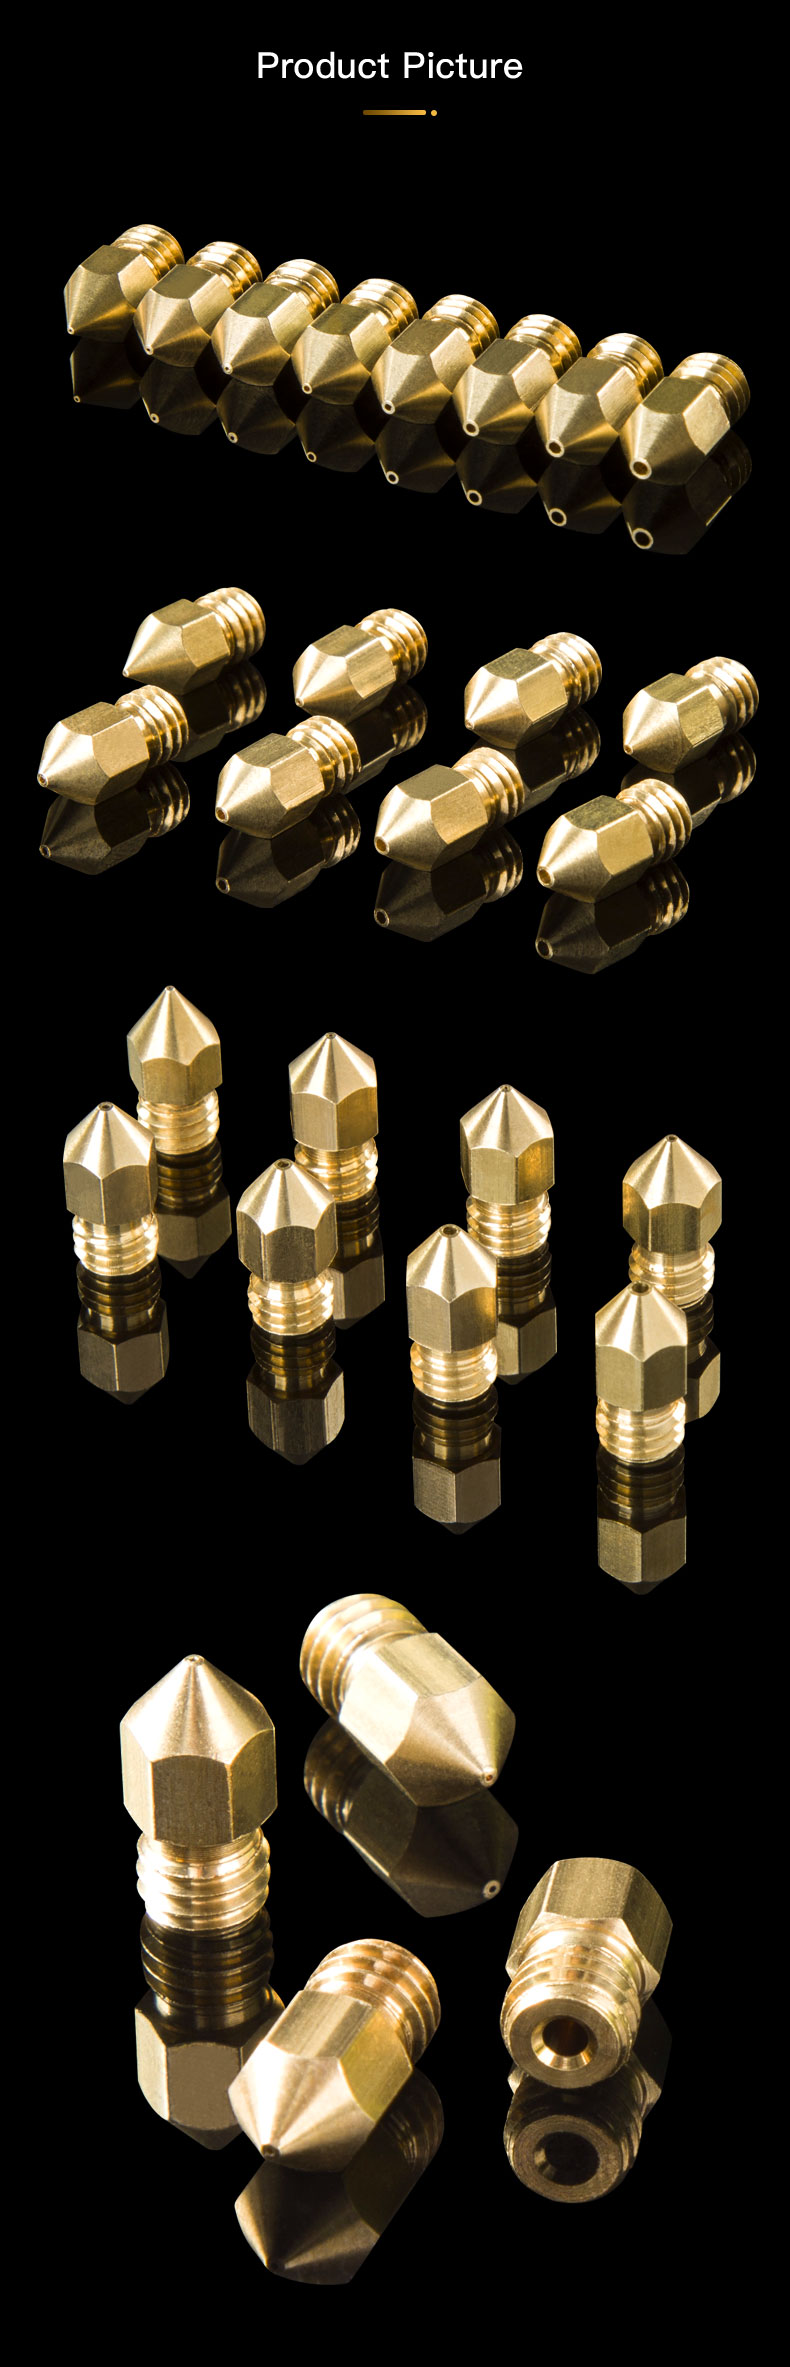 Creality MK brass Nozzle (5 pack)